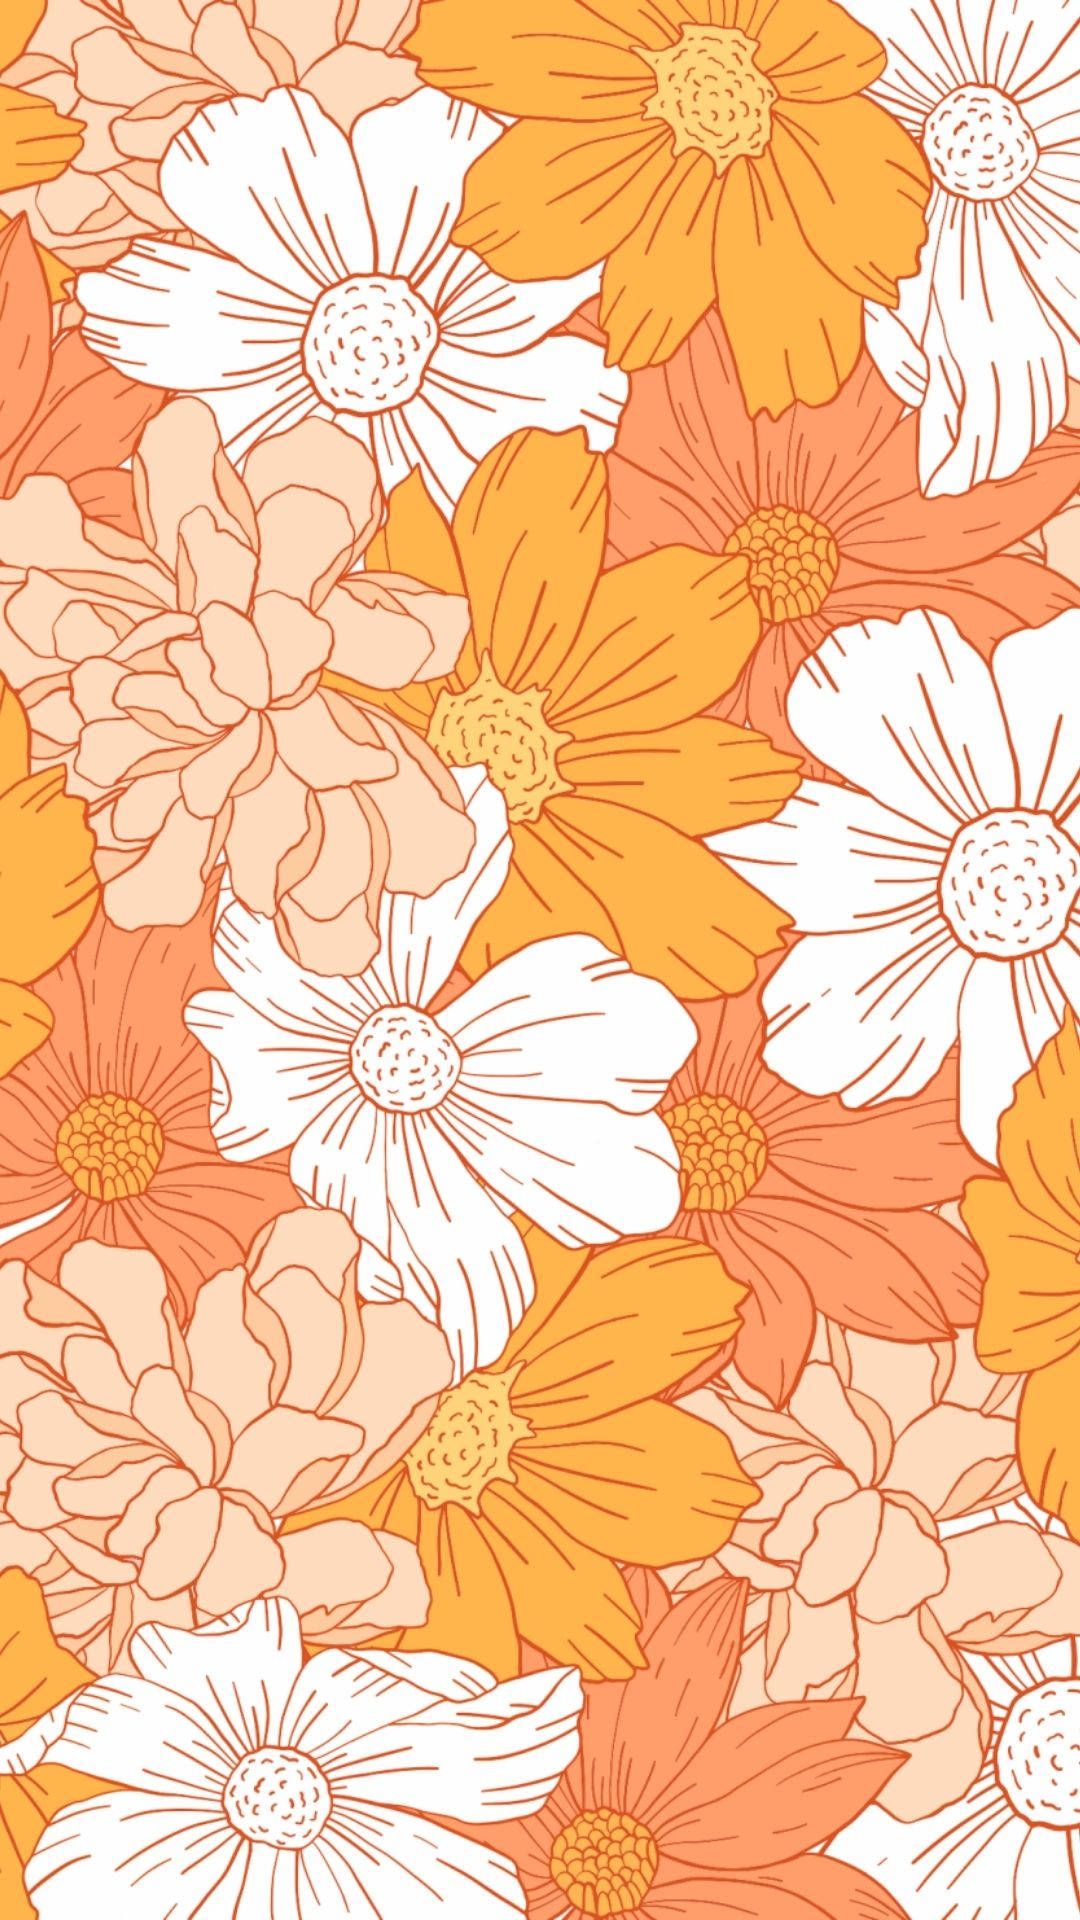 A pattern of orange and white flowers - Flower, bright